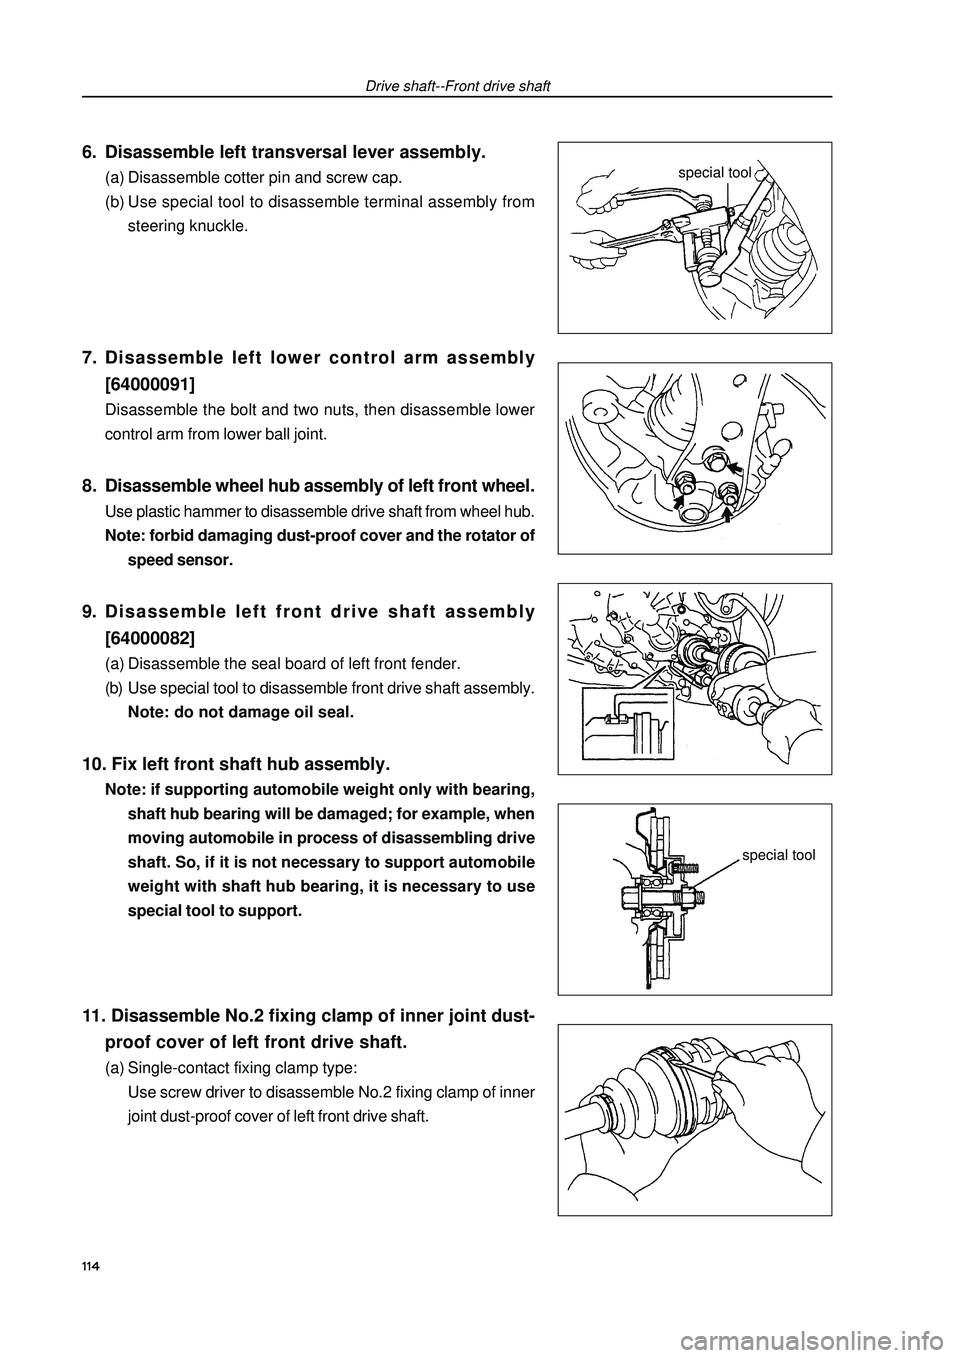 GEELY FC 2008  Workshop Manual 6. Disassemble left transversal lever assembly.(a) Disassemble cotter pin and screw cap.
(b) Use special tool to disassemble terminal assembly from
steering knuckle.7. Disassemble left lower control a